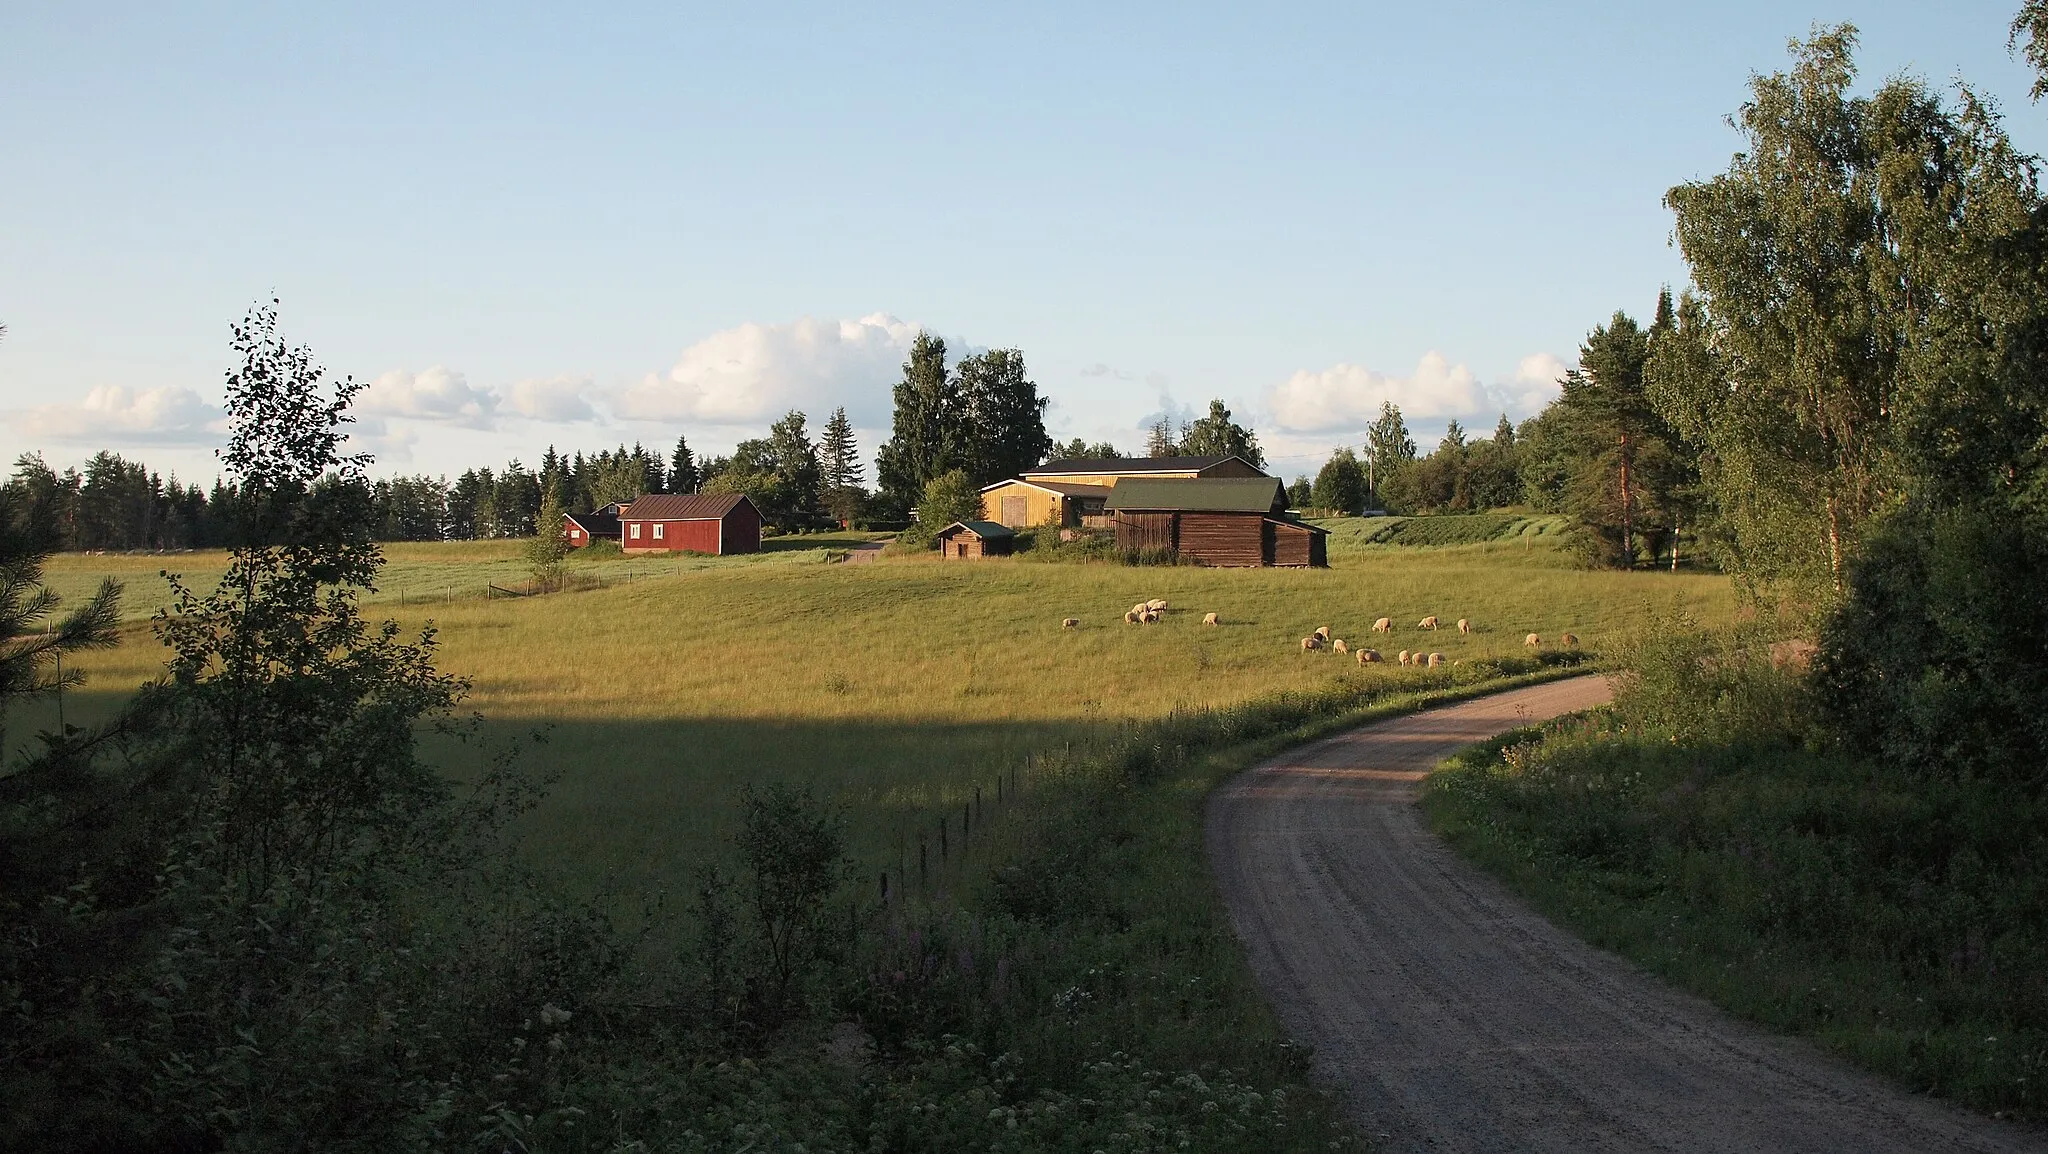 Photo showing: The village of Punkka near Suomenniemi, a former municipality of Finland. Suomenniemi was consolidated with the city of Mikkeli on January 1, 2013.